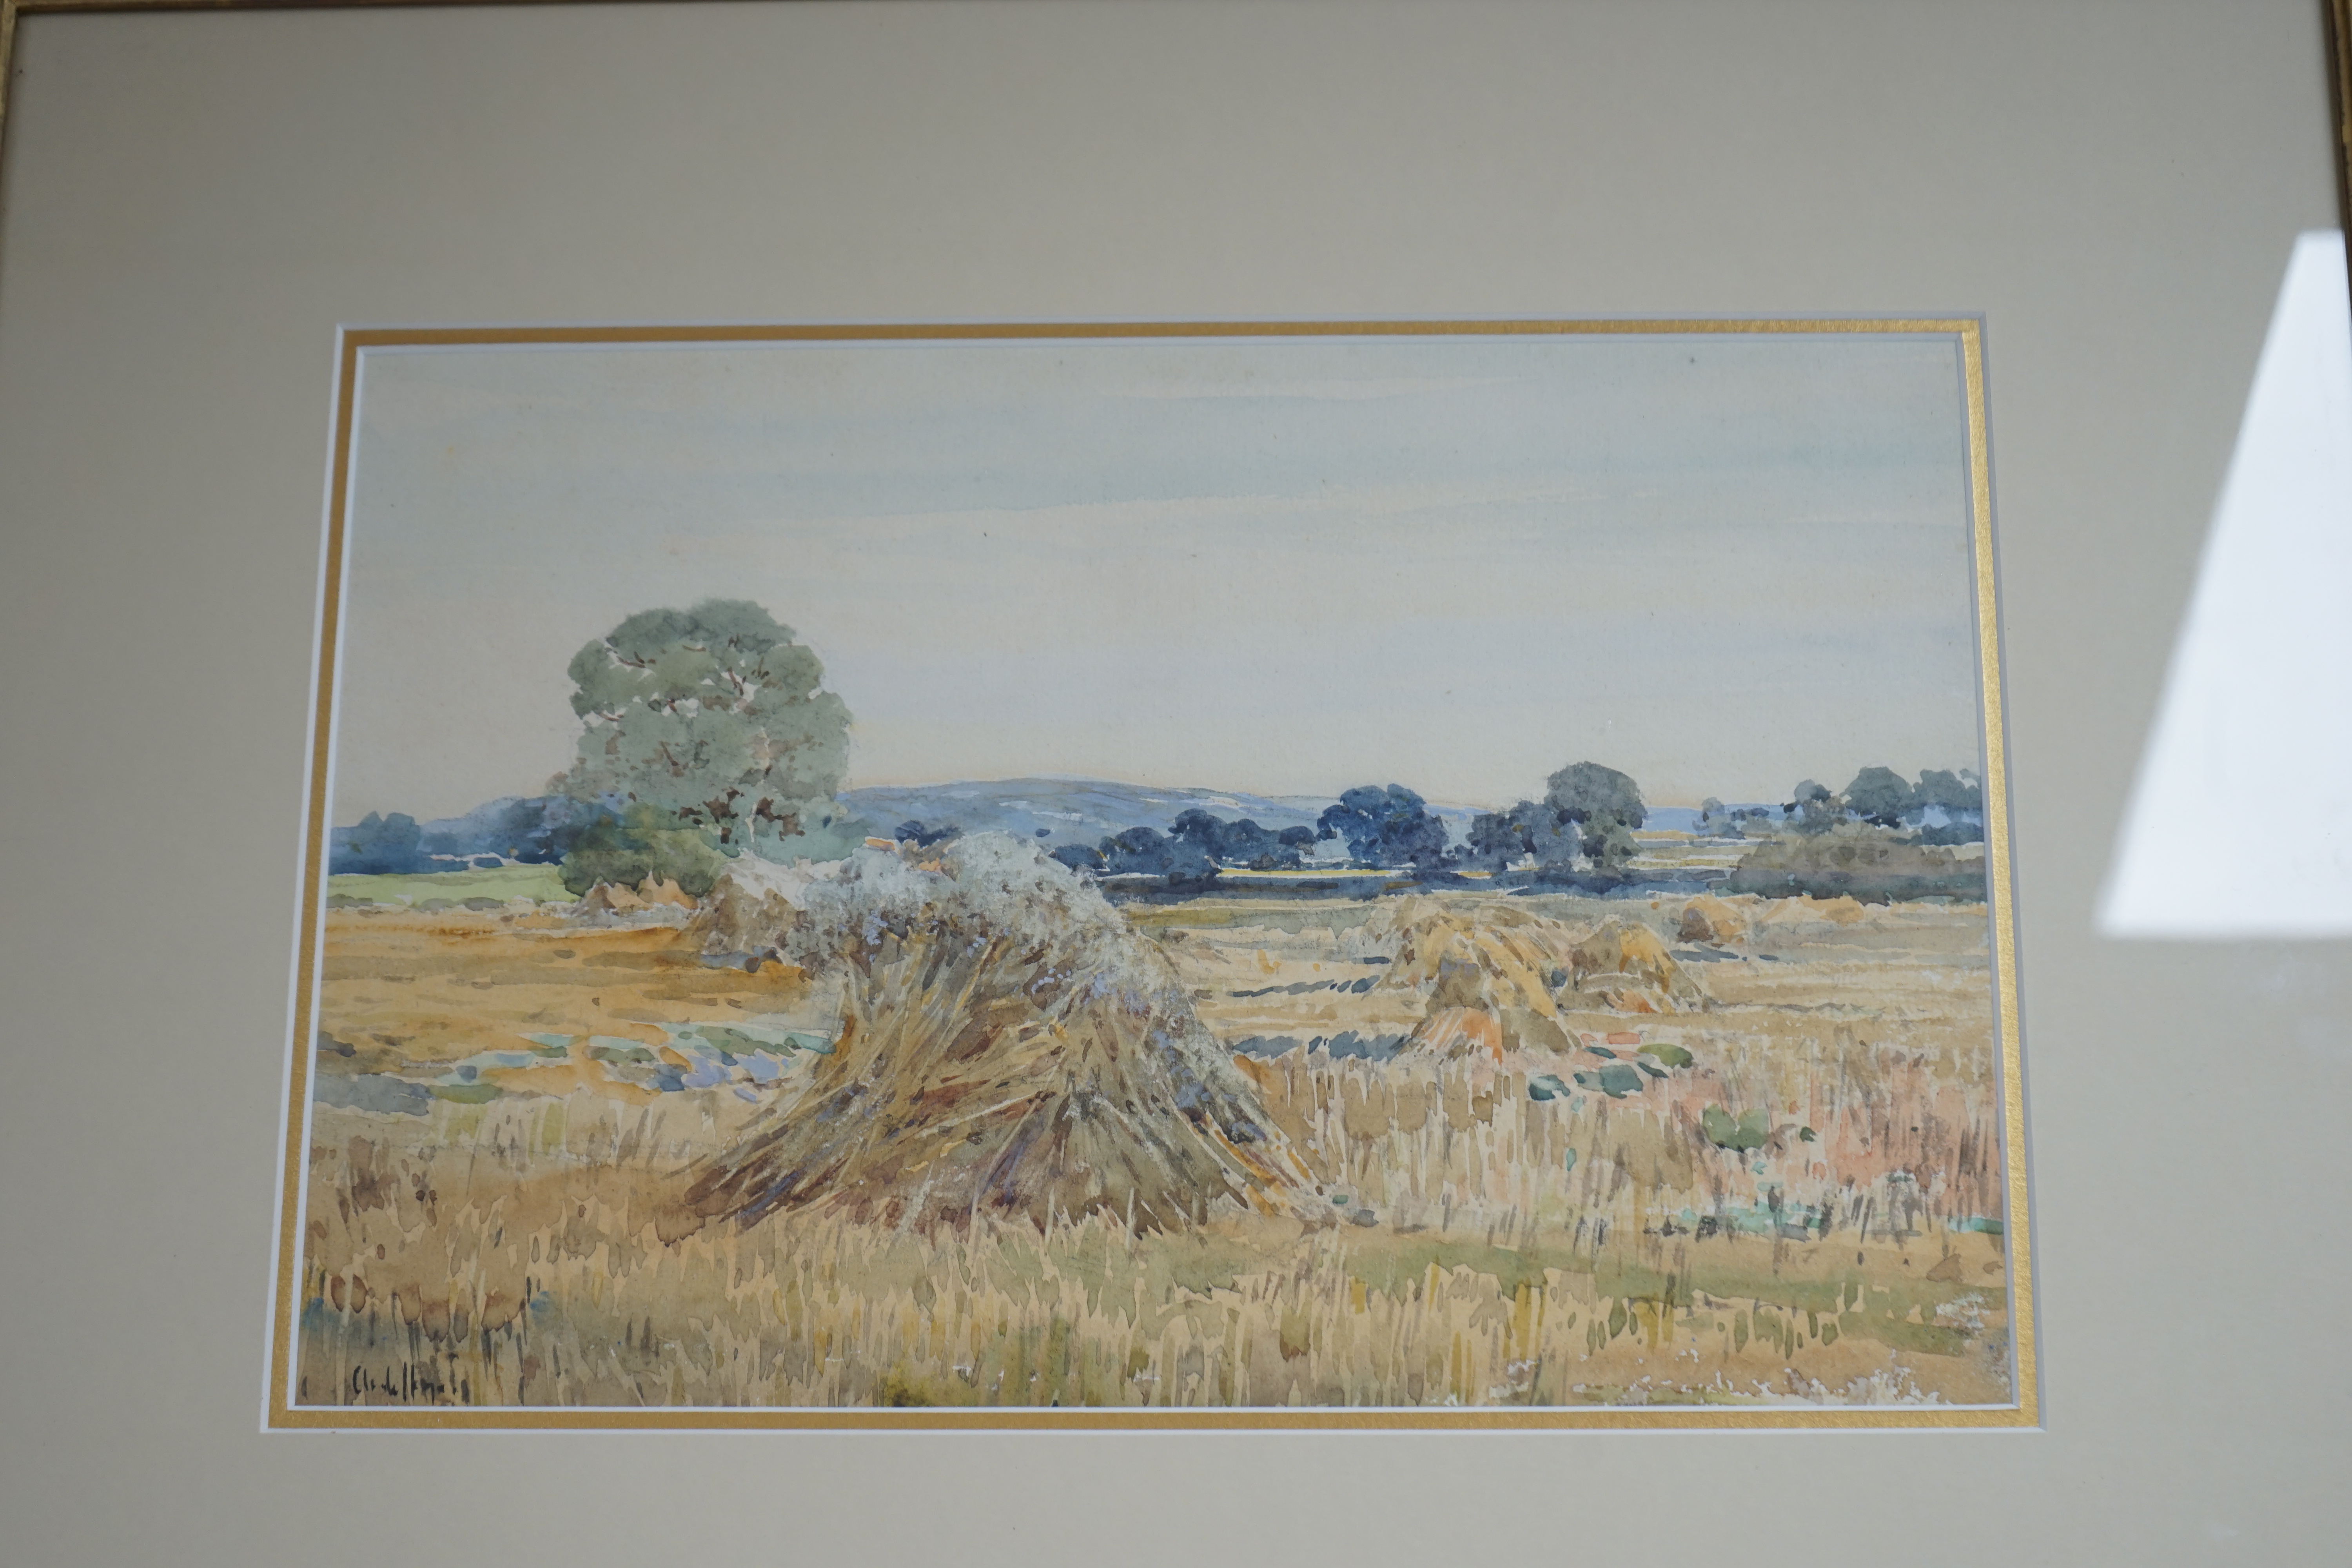 Claude Hayes (1852-1922), two watercolours, 'Haymaking, Norfolk' and 'Cornfield near Bredon, Worcestershire', each signed, 24 x 34cm, gilt framed. Condition - poor to fair, some staining and foxing